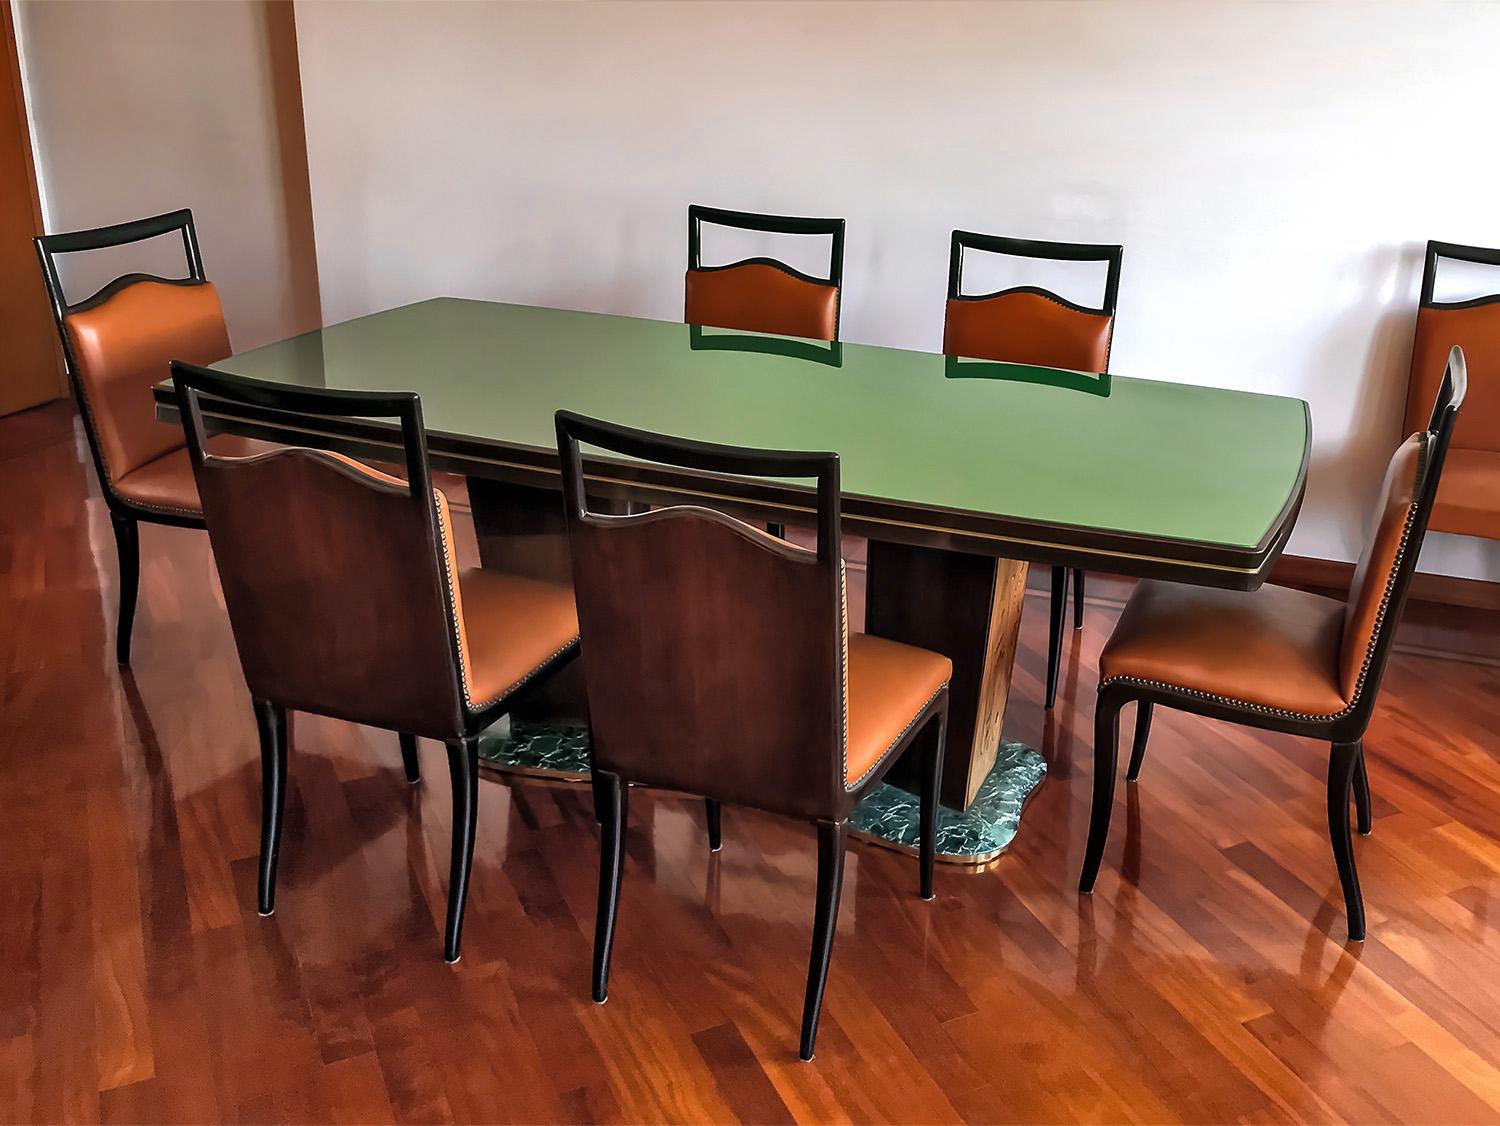 For your consideration this elegant dining room set in Art Deco style, designed by Vittorio Dassi in the 1950s, composed by dining Table with its Chairs (set of 8).
The top-table has a glass back-treated with green colored paper and is supported by